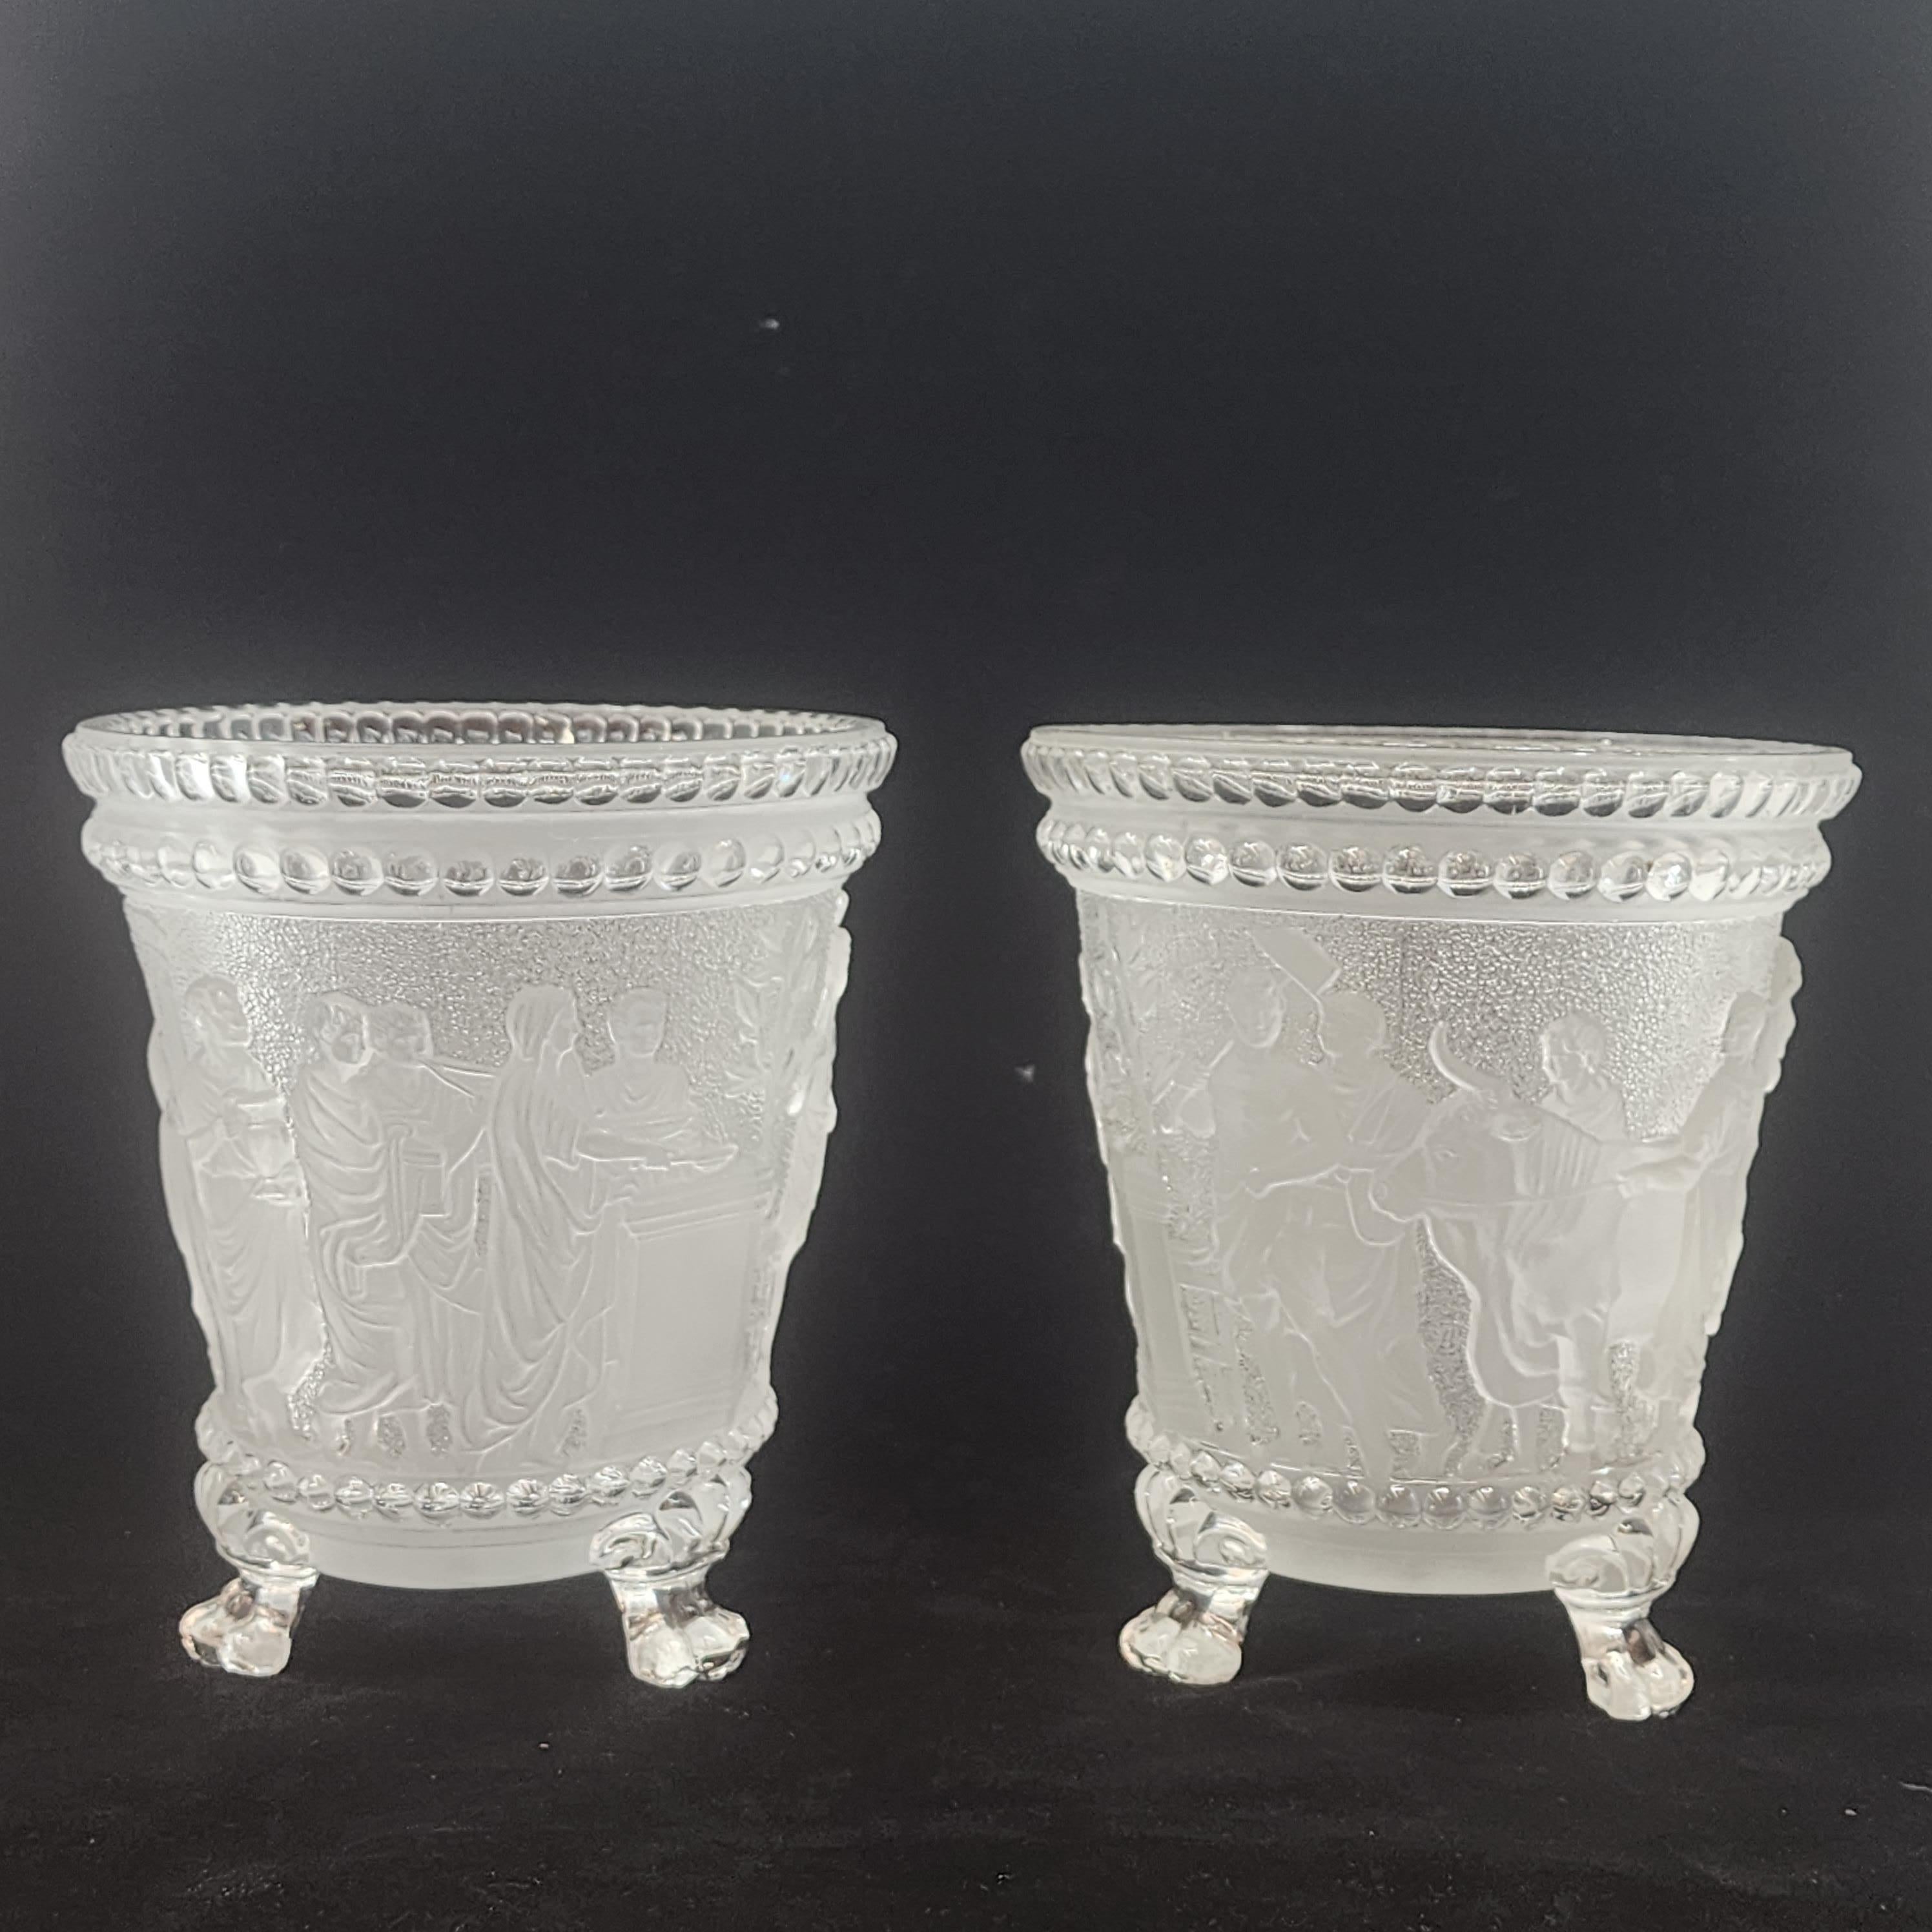 Pair of 19th Century Grand Tour Style Compotes by Baccarat 1